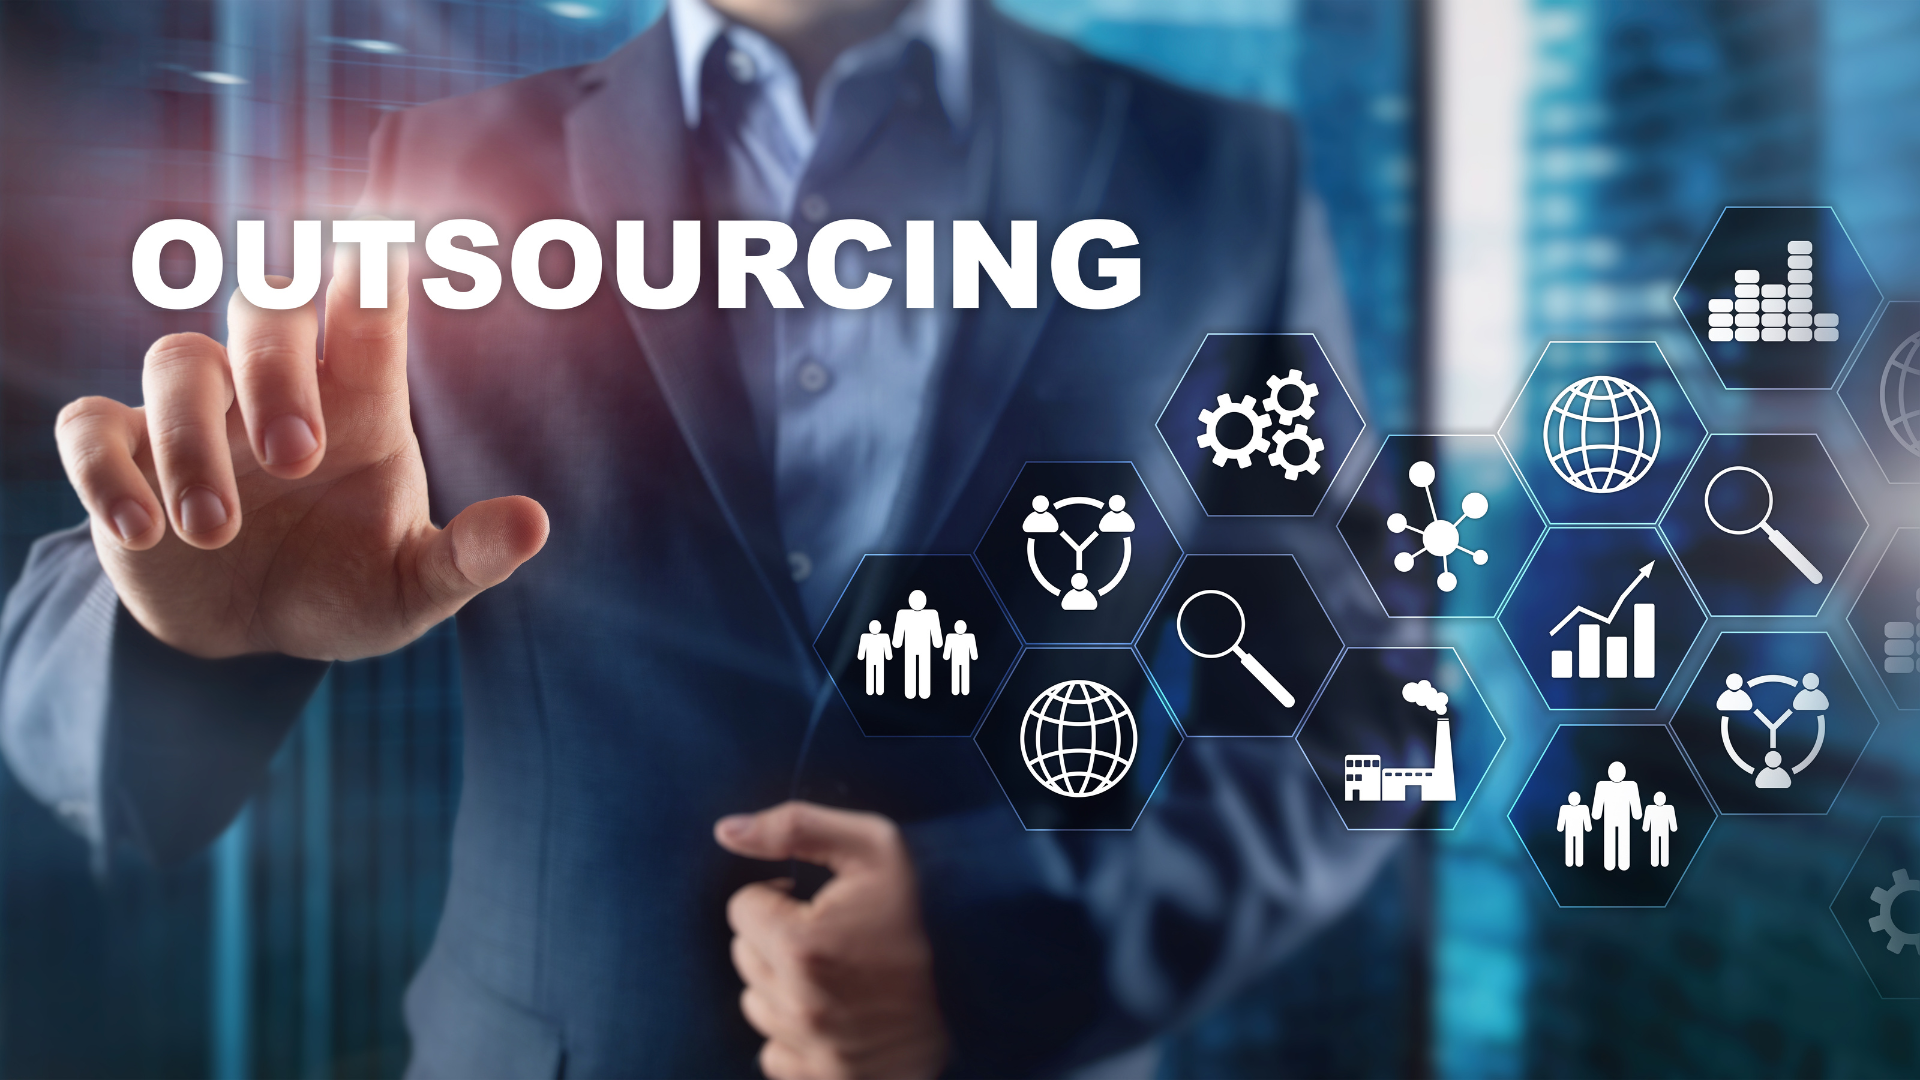 Software outsourcing definition